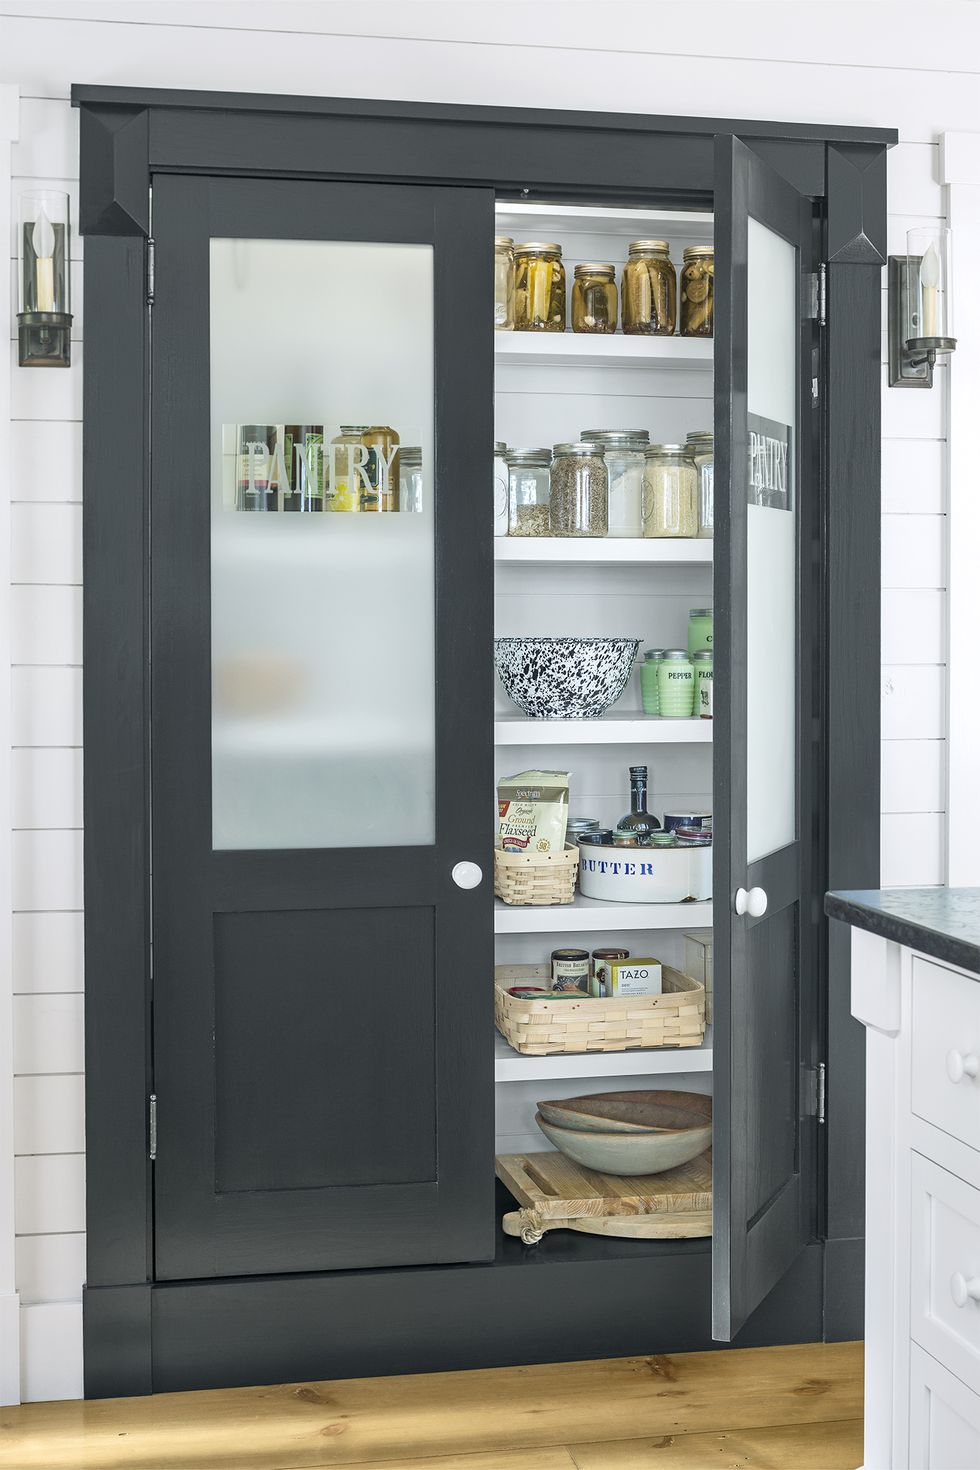 how to organize your kitchen pantry cabinet - Lemon Grove Lane